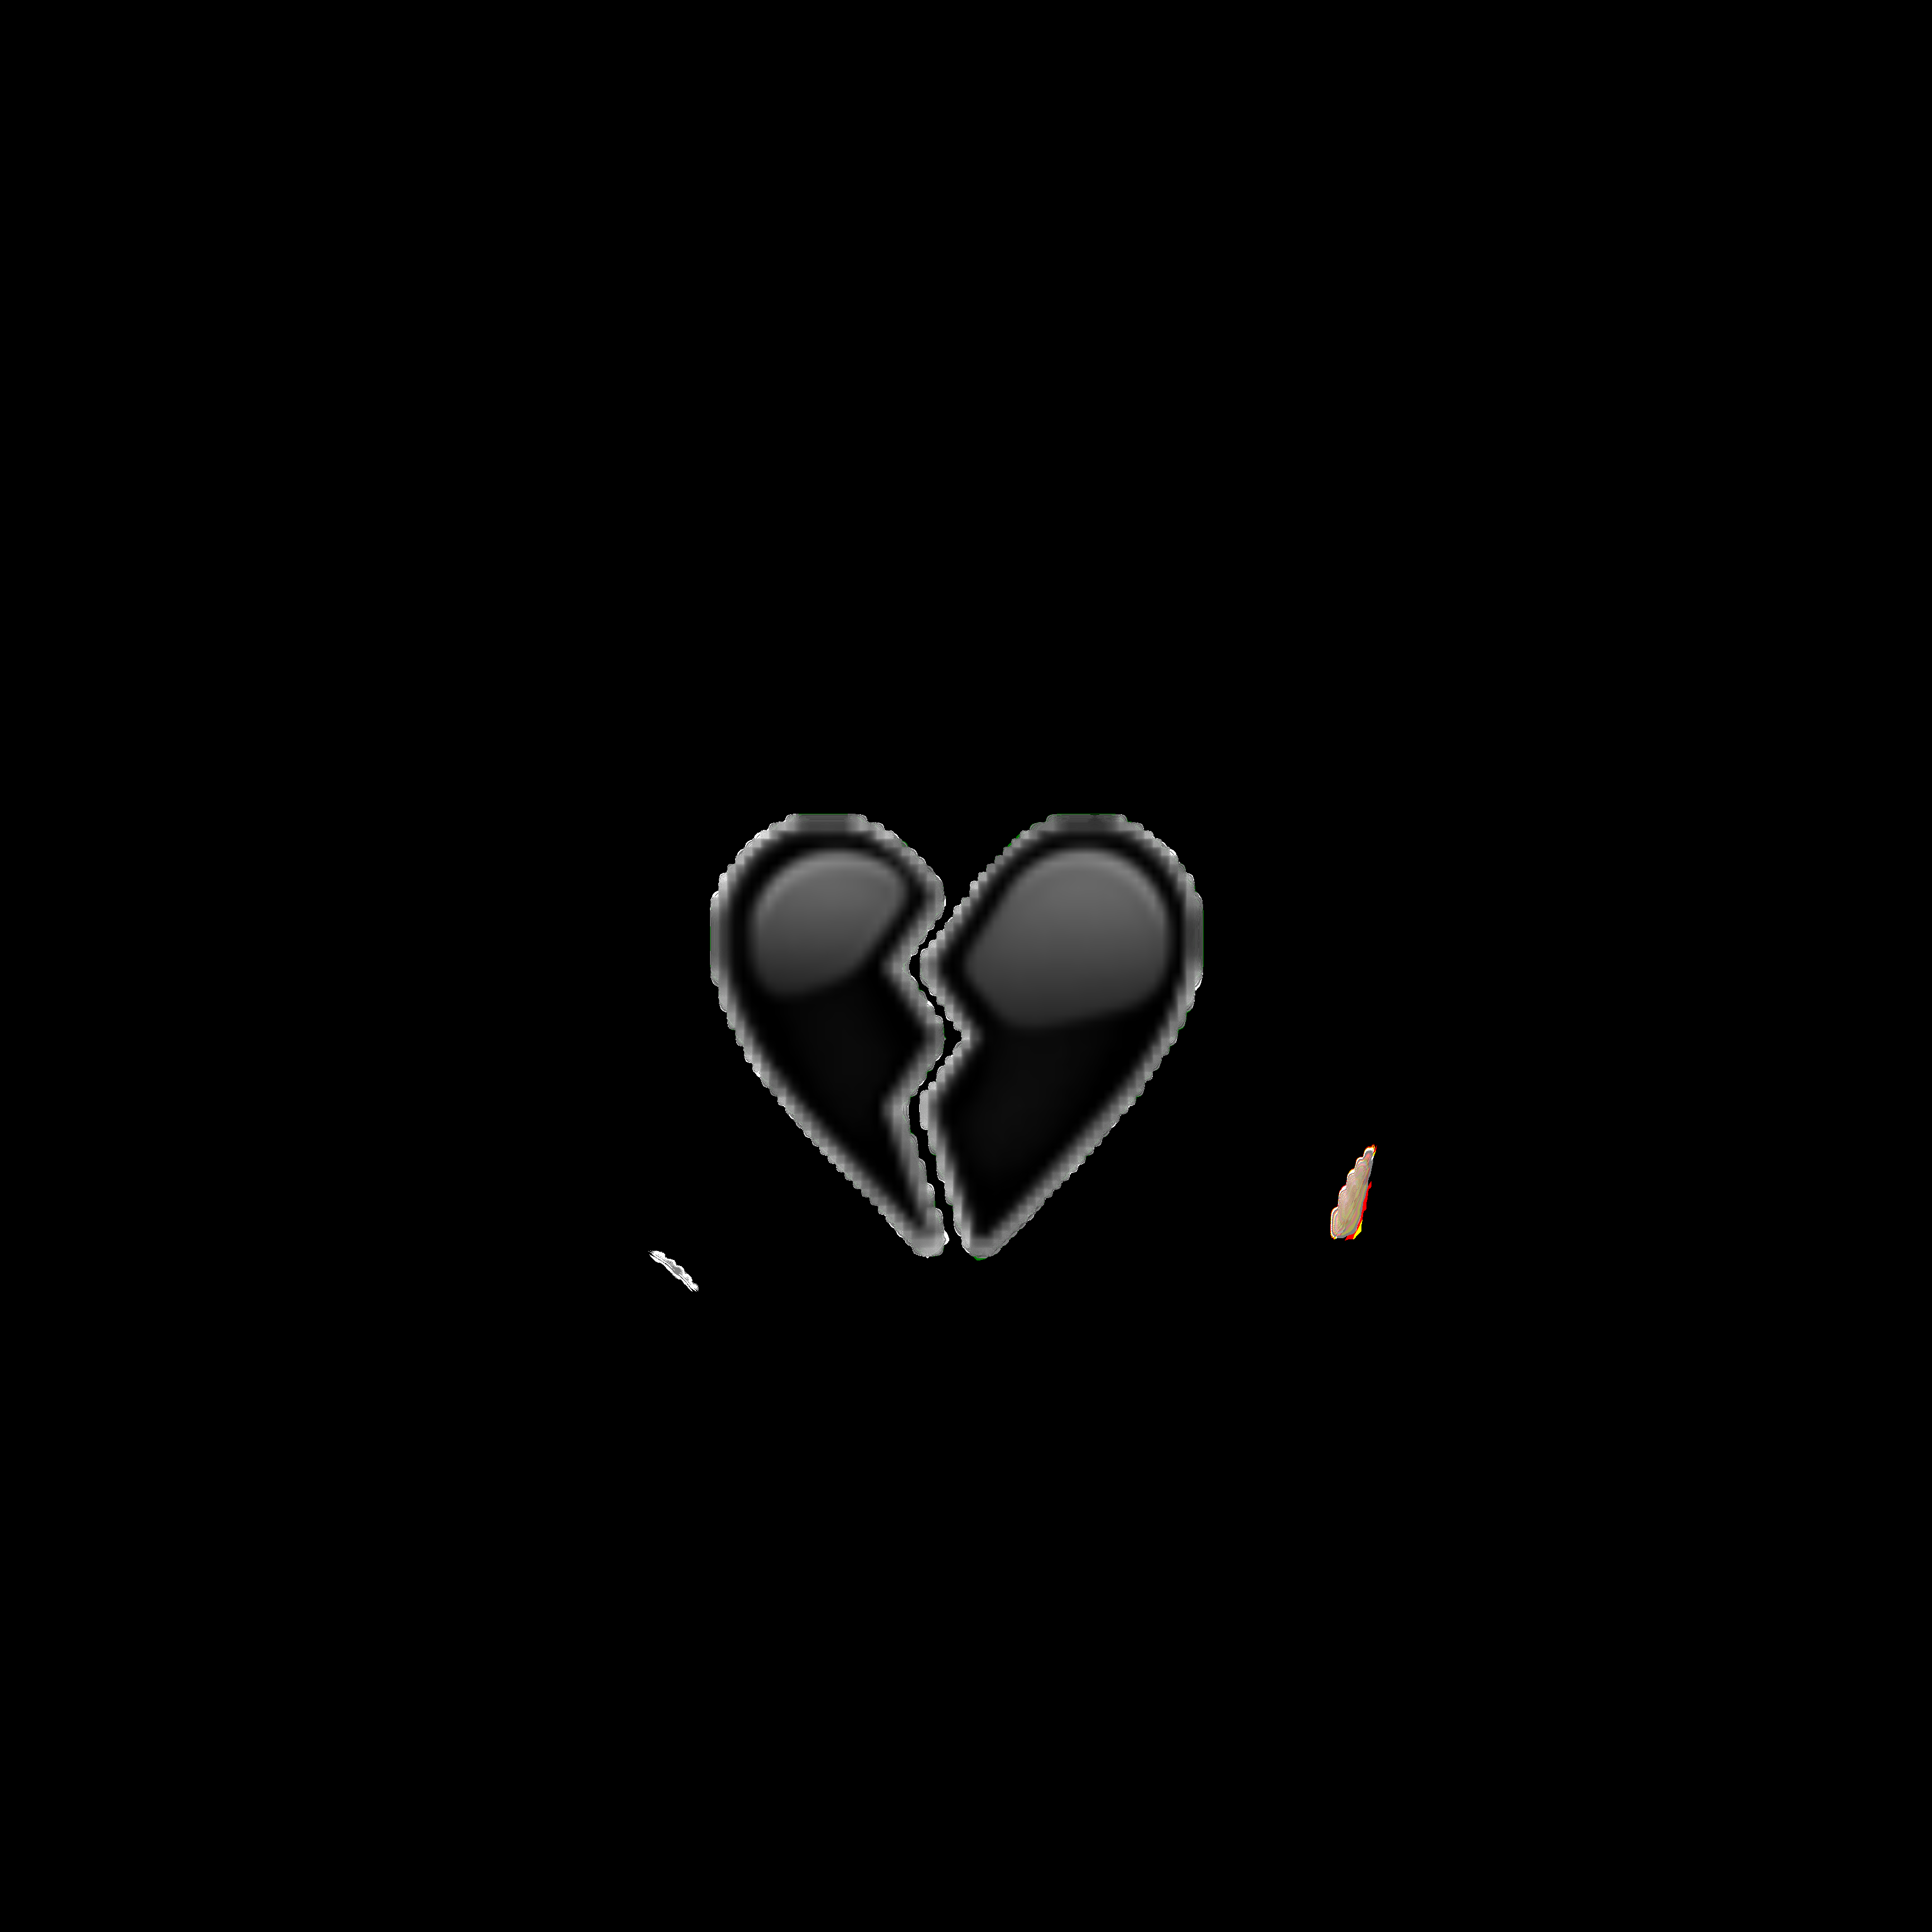 Broken Heart Black And White Wallpapers